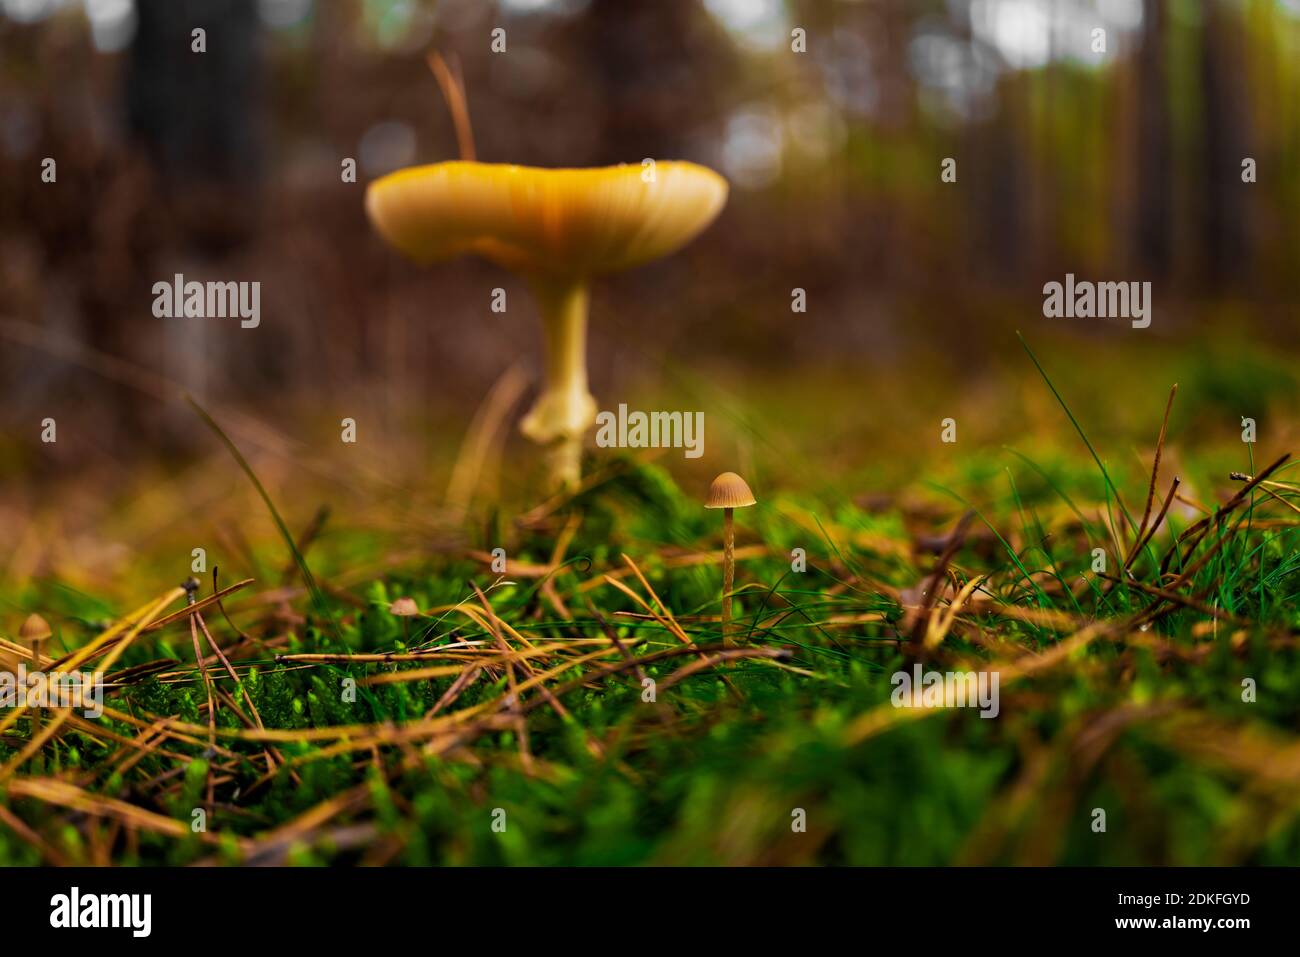 Small mushroom in autumn in the forest in front of a large mushroom Stock Photo